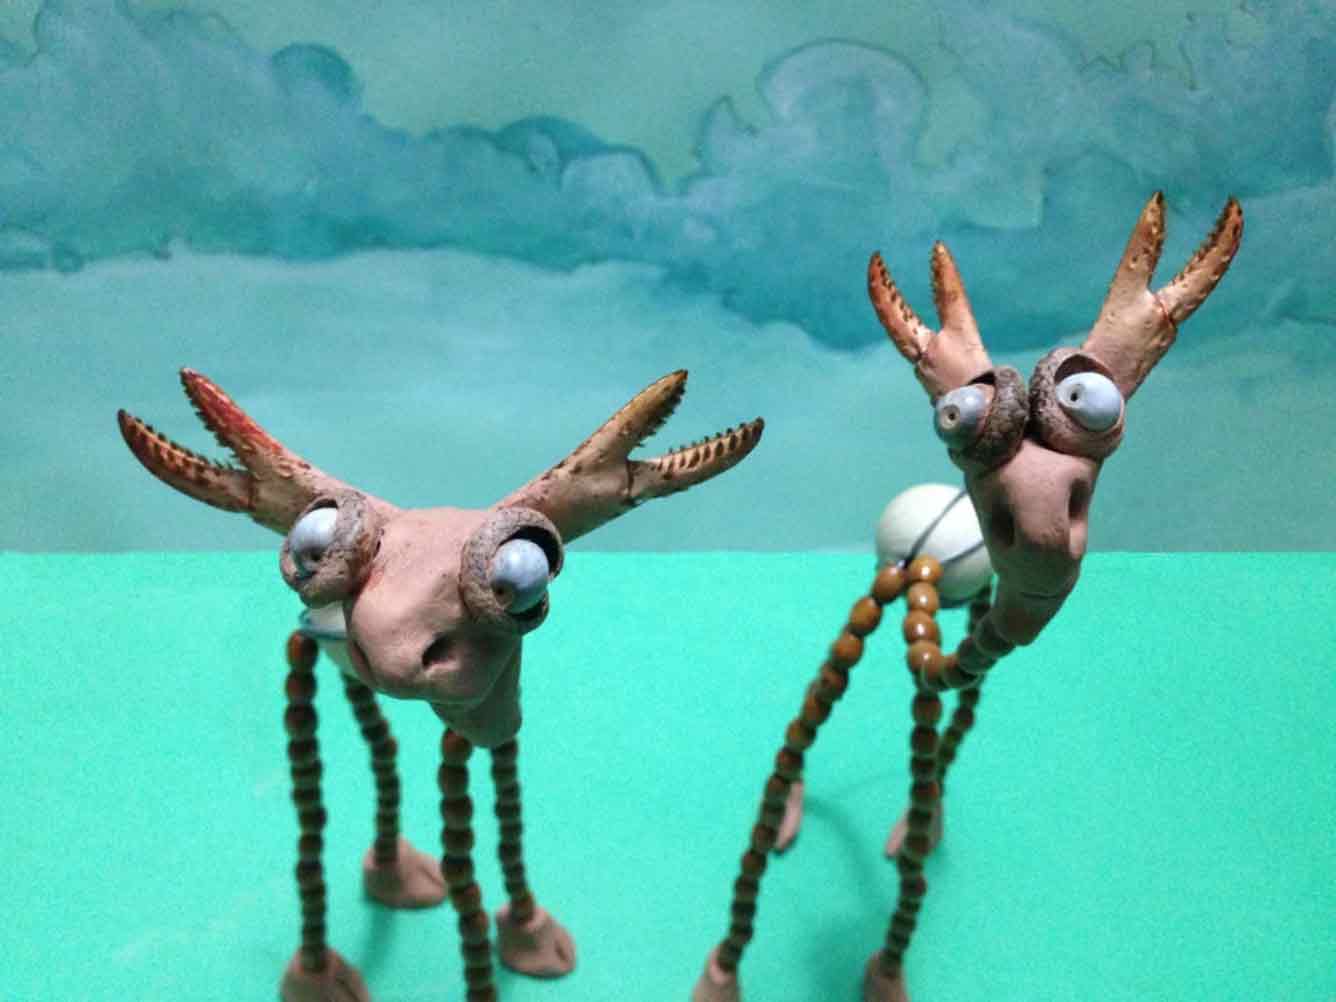 Two Moose-like stop motion characters look surprised in a green meadow on a sunny day.